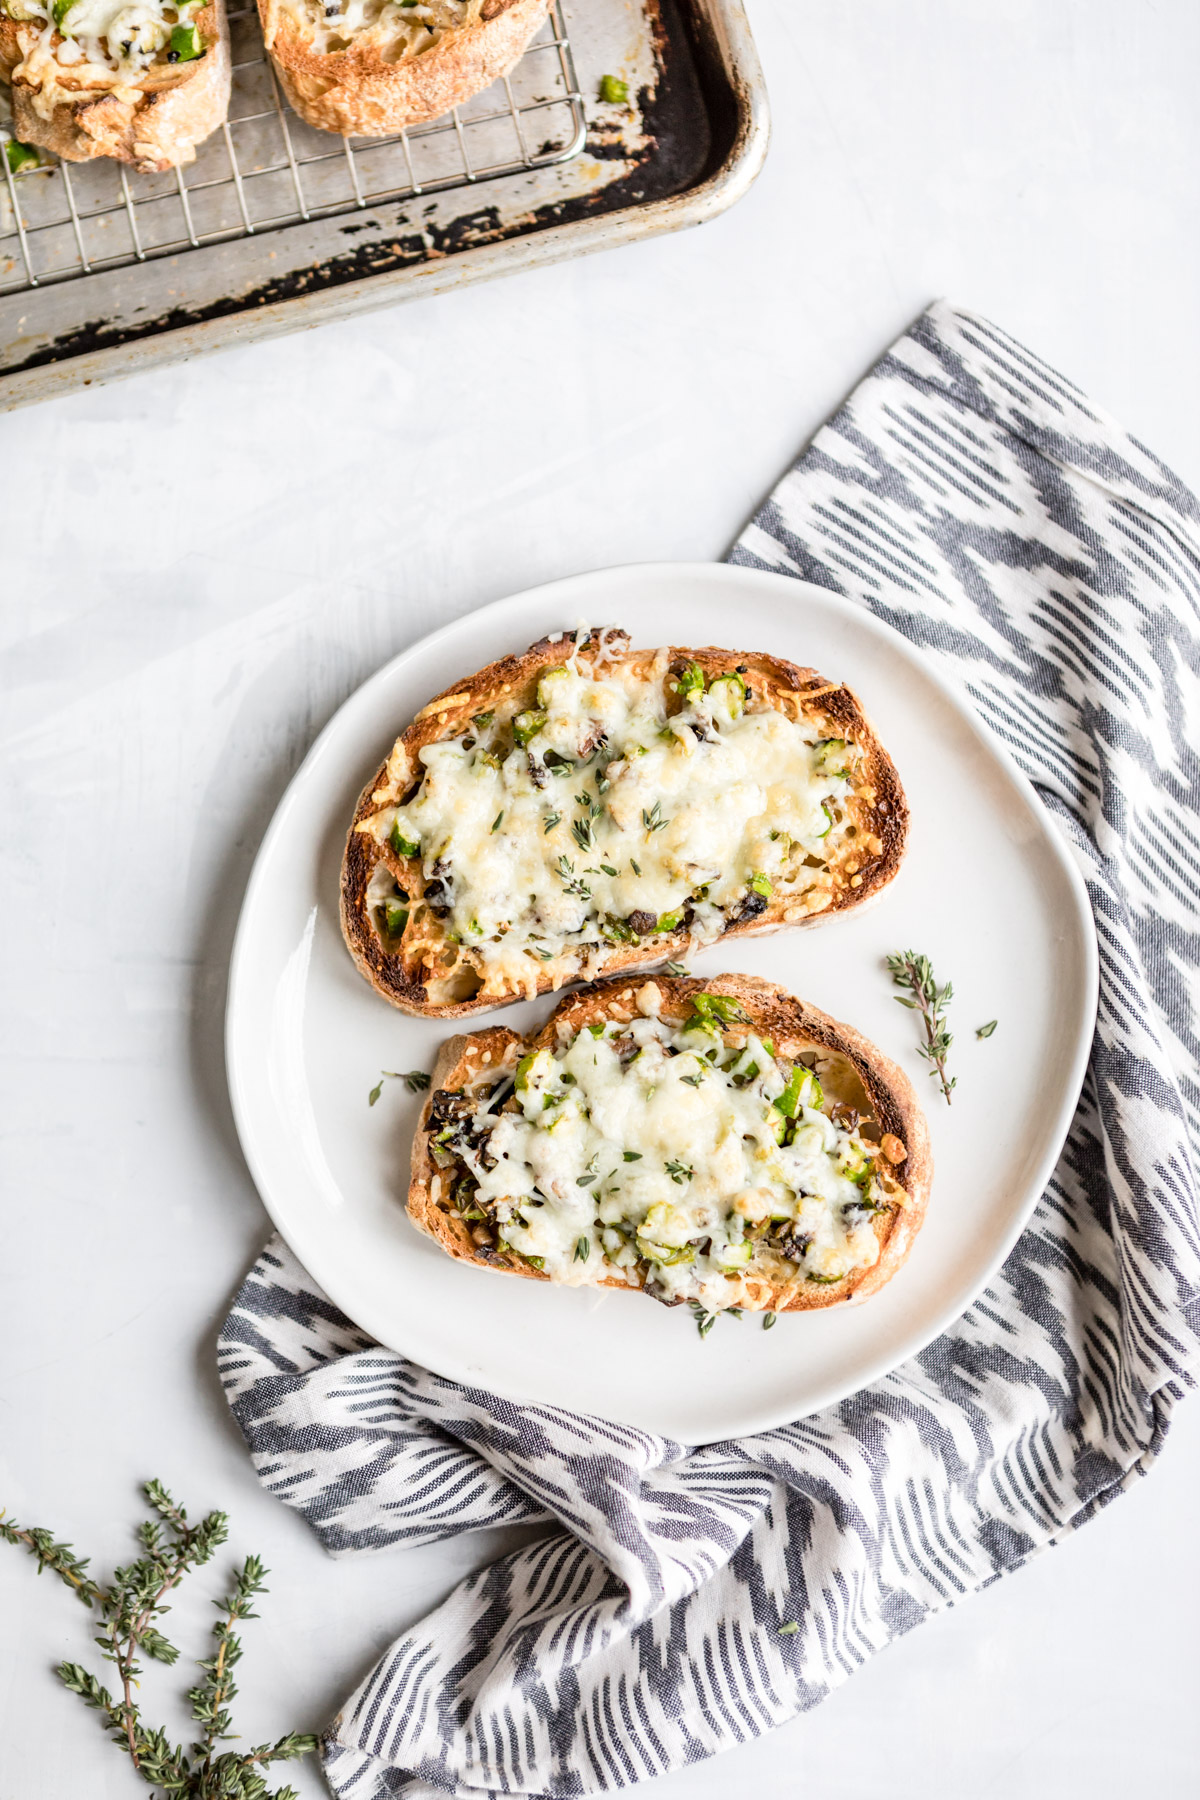 Say Hello to Spring With These Cremini and Asparagus Tartines